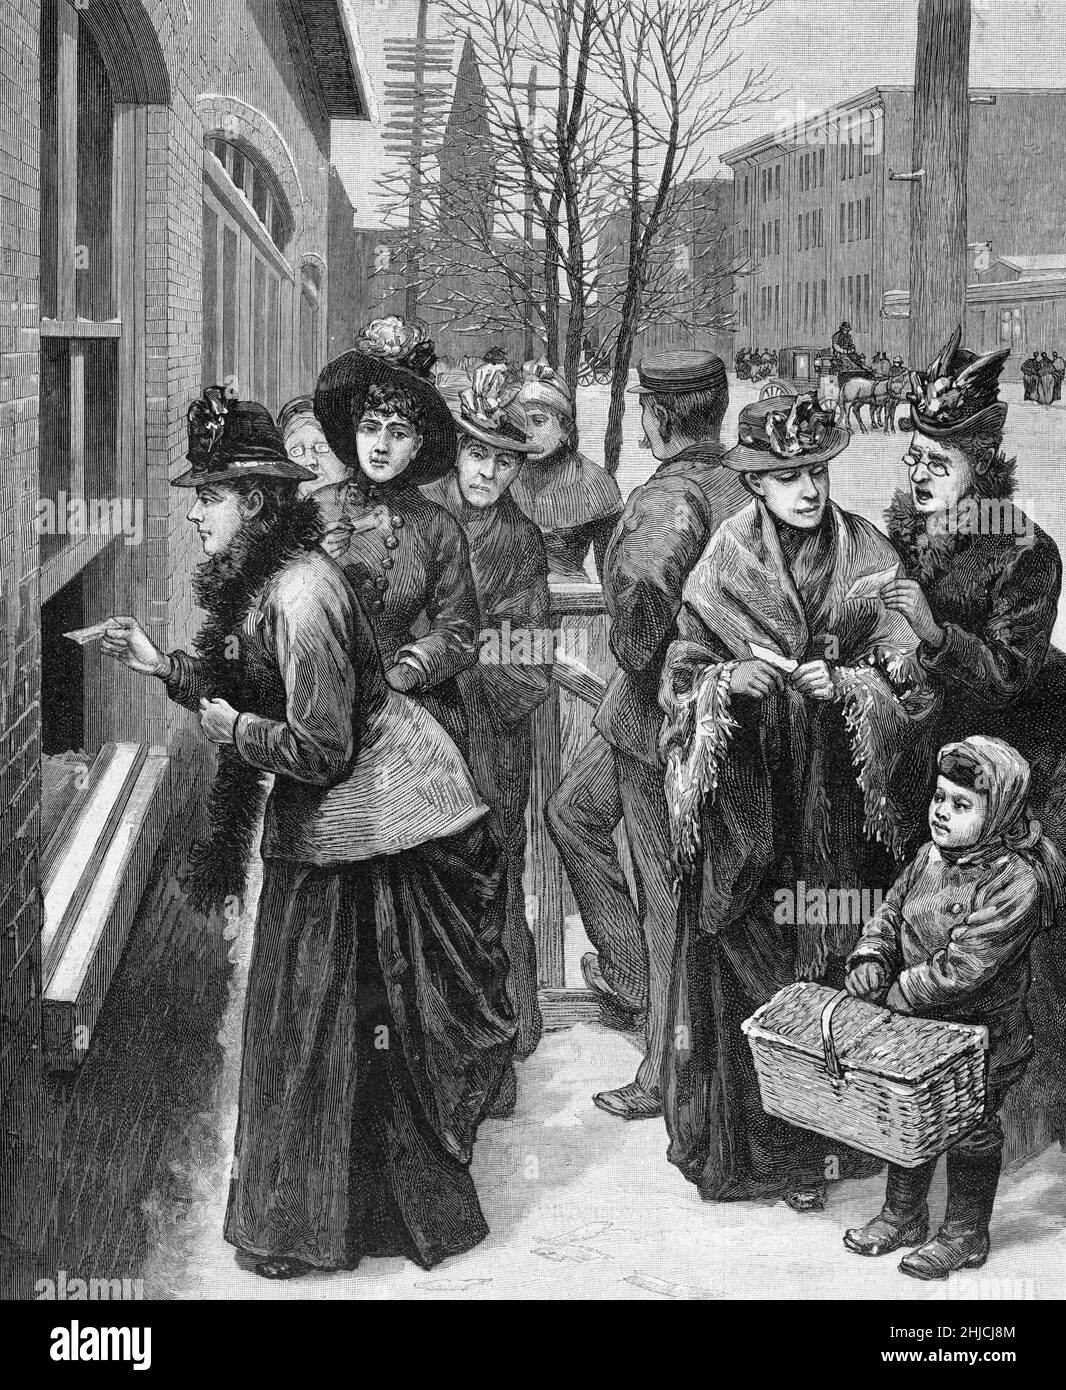 Scene of women voting at the polls in Cheyenne, Wyoming, 1888. Wyoming Territory gave women the right to vote and hold public office in 1869, the first place in the US to do so. In 1890, Wyoming became the first U.S. state to allow its female citizens to vote. Wood engraving, from Frank Leslie's Illustrated Newspaper, November 24, 1888. Stock Photo